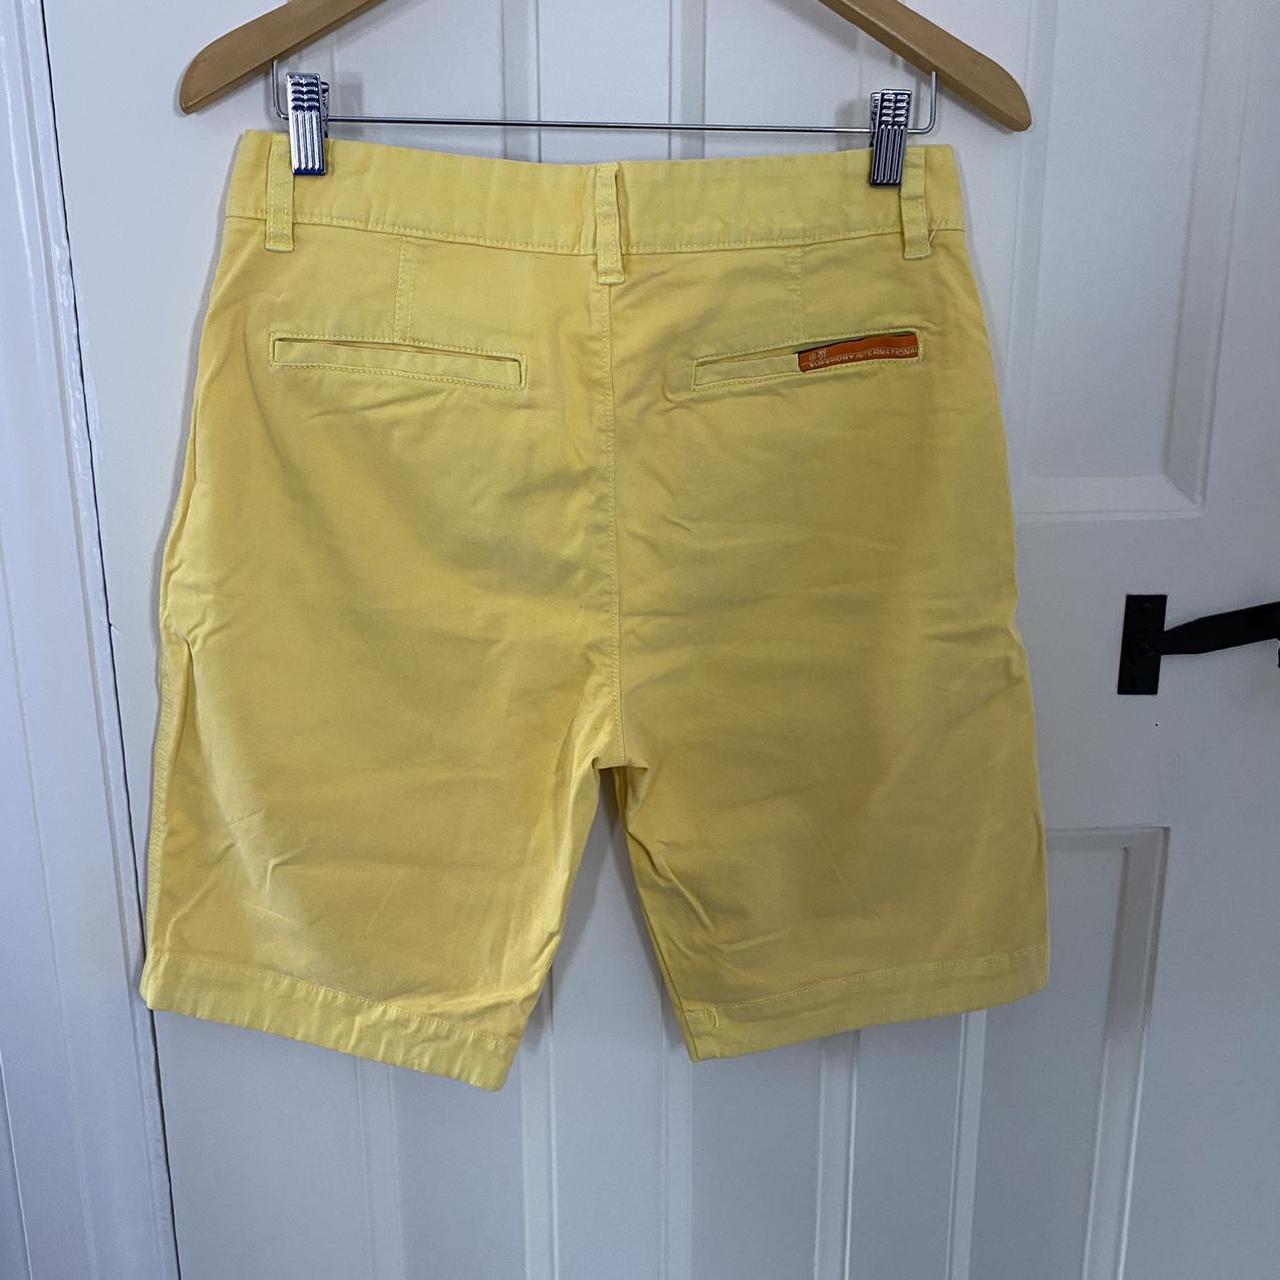 Product Image 2 - Men’s Superdry international shorts

Yellow

Size small

#superdry